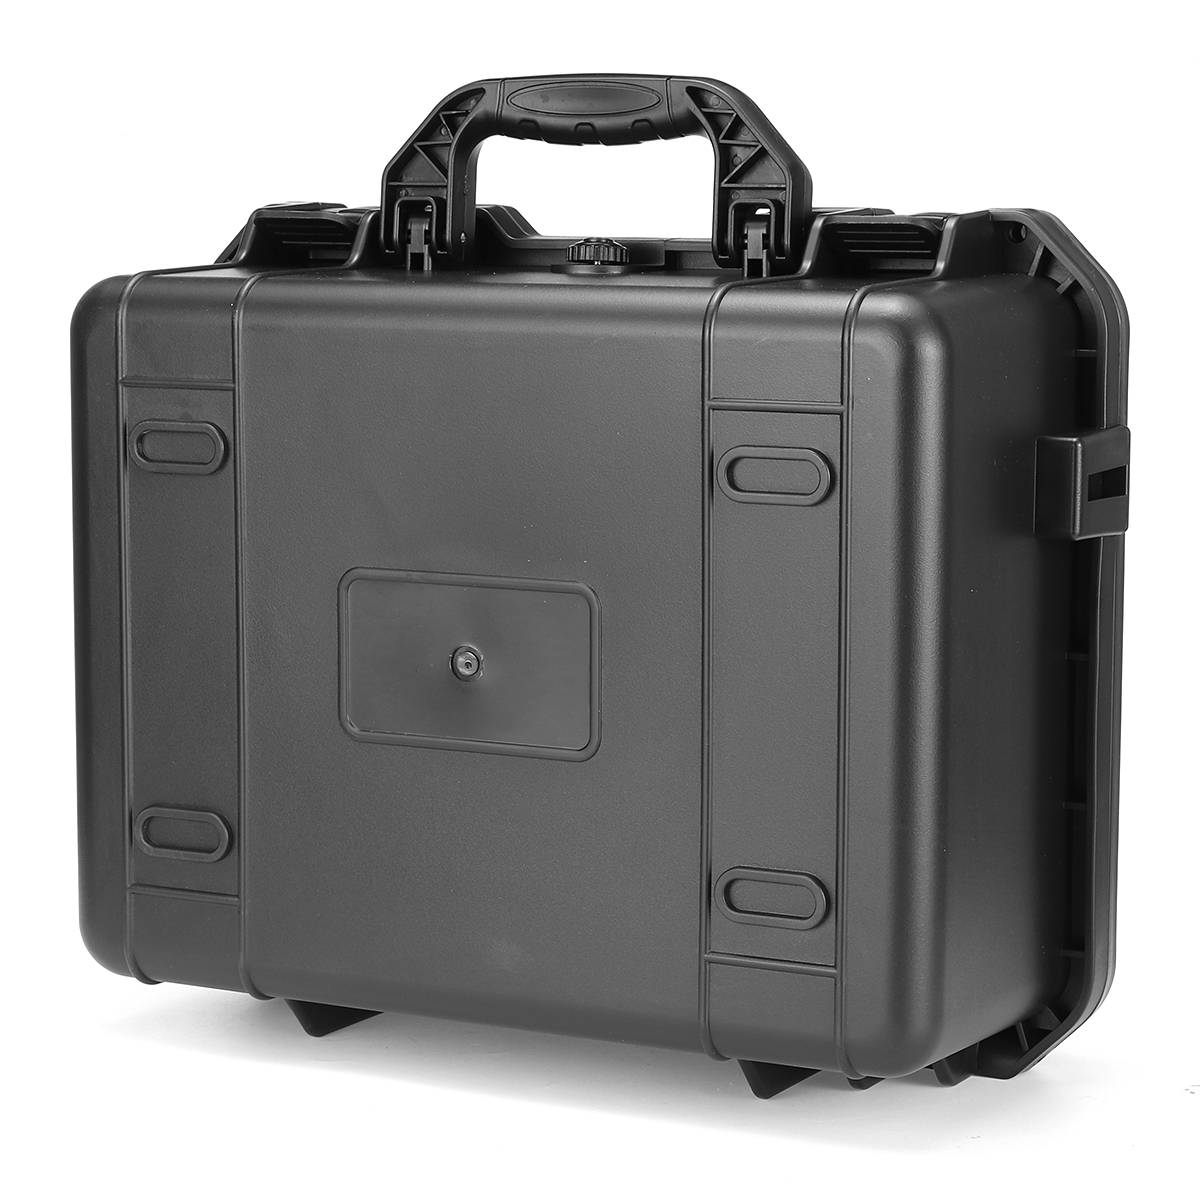 1PC-Shockproof-Sealed-Safety-Case-Toolbox-Airtight-Waterproof-Tool-Box-Instrument-Case-Dry-Box-with--1915433-13